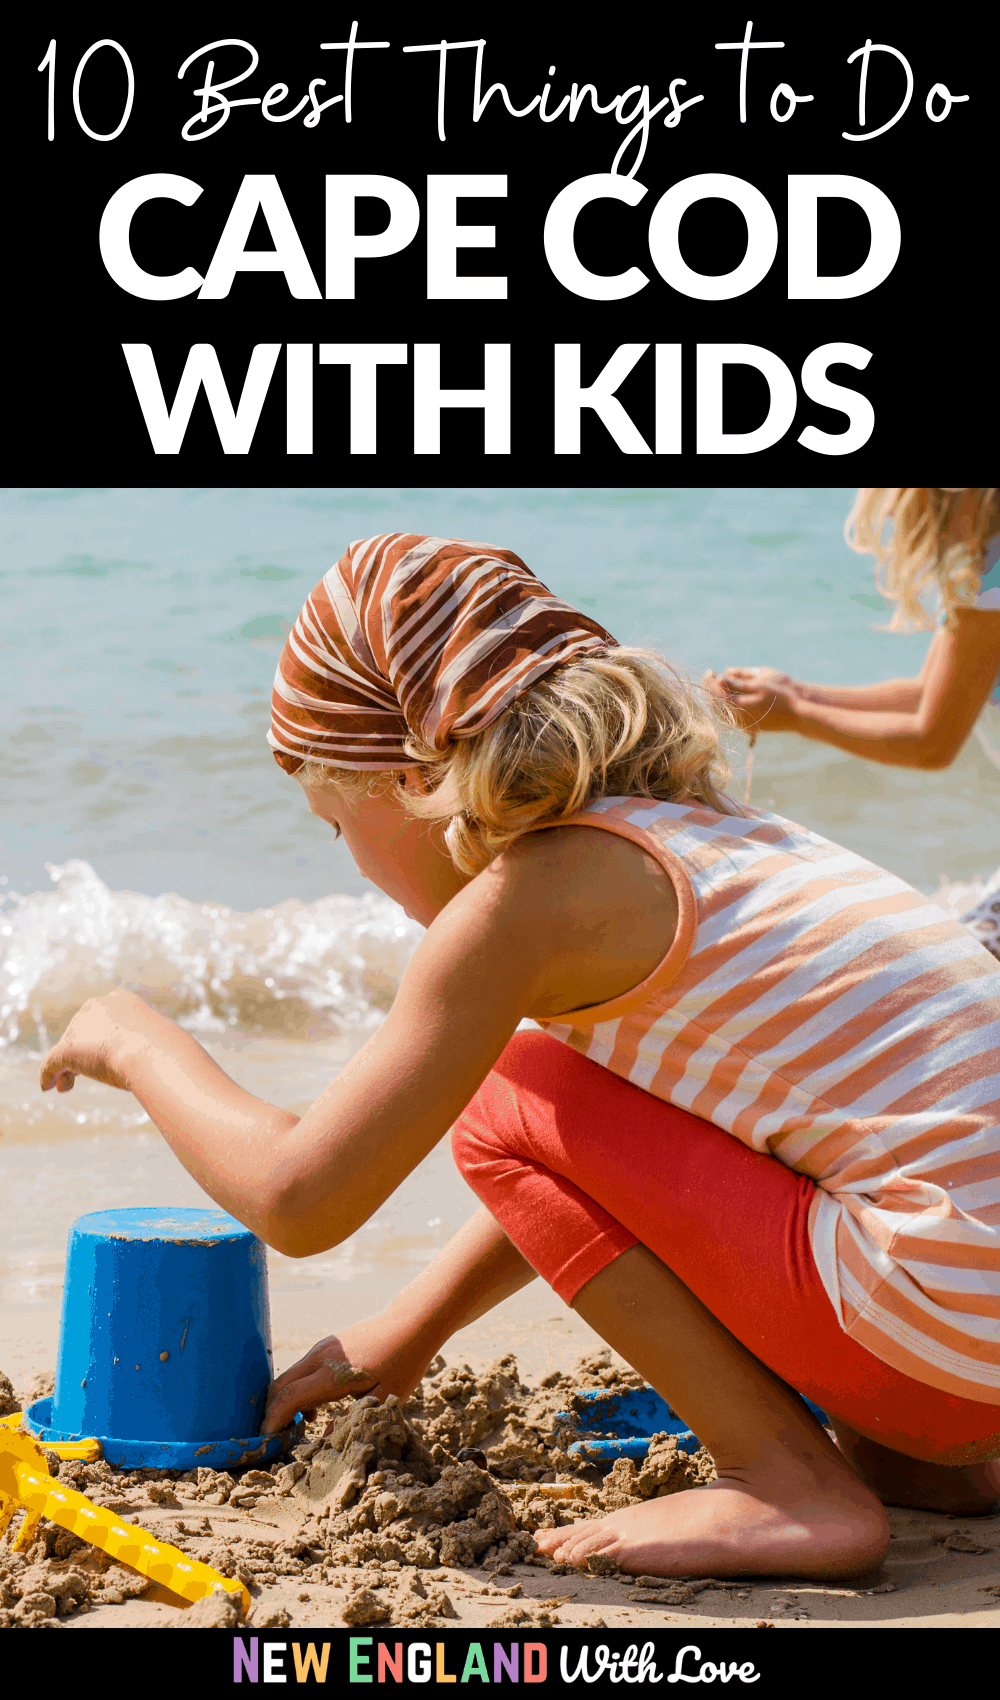 Pinterest graphic reading "10 Best Things To Do Cape Cod With Kids"